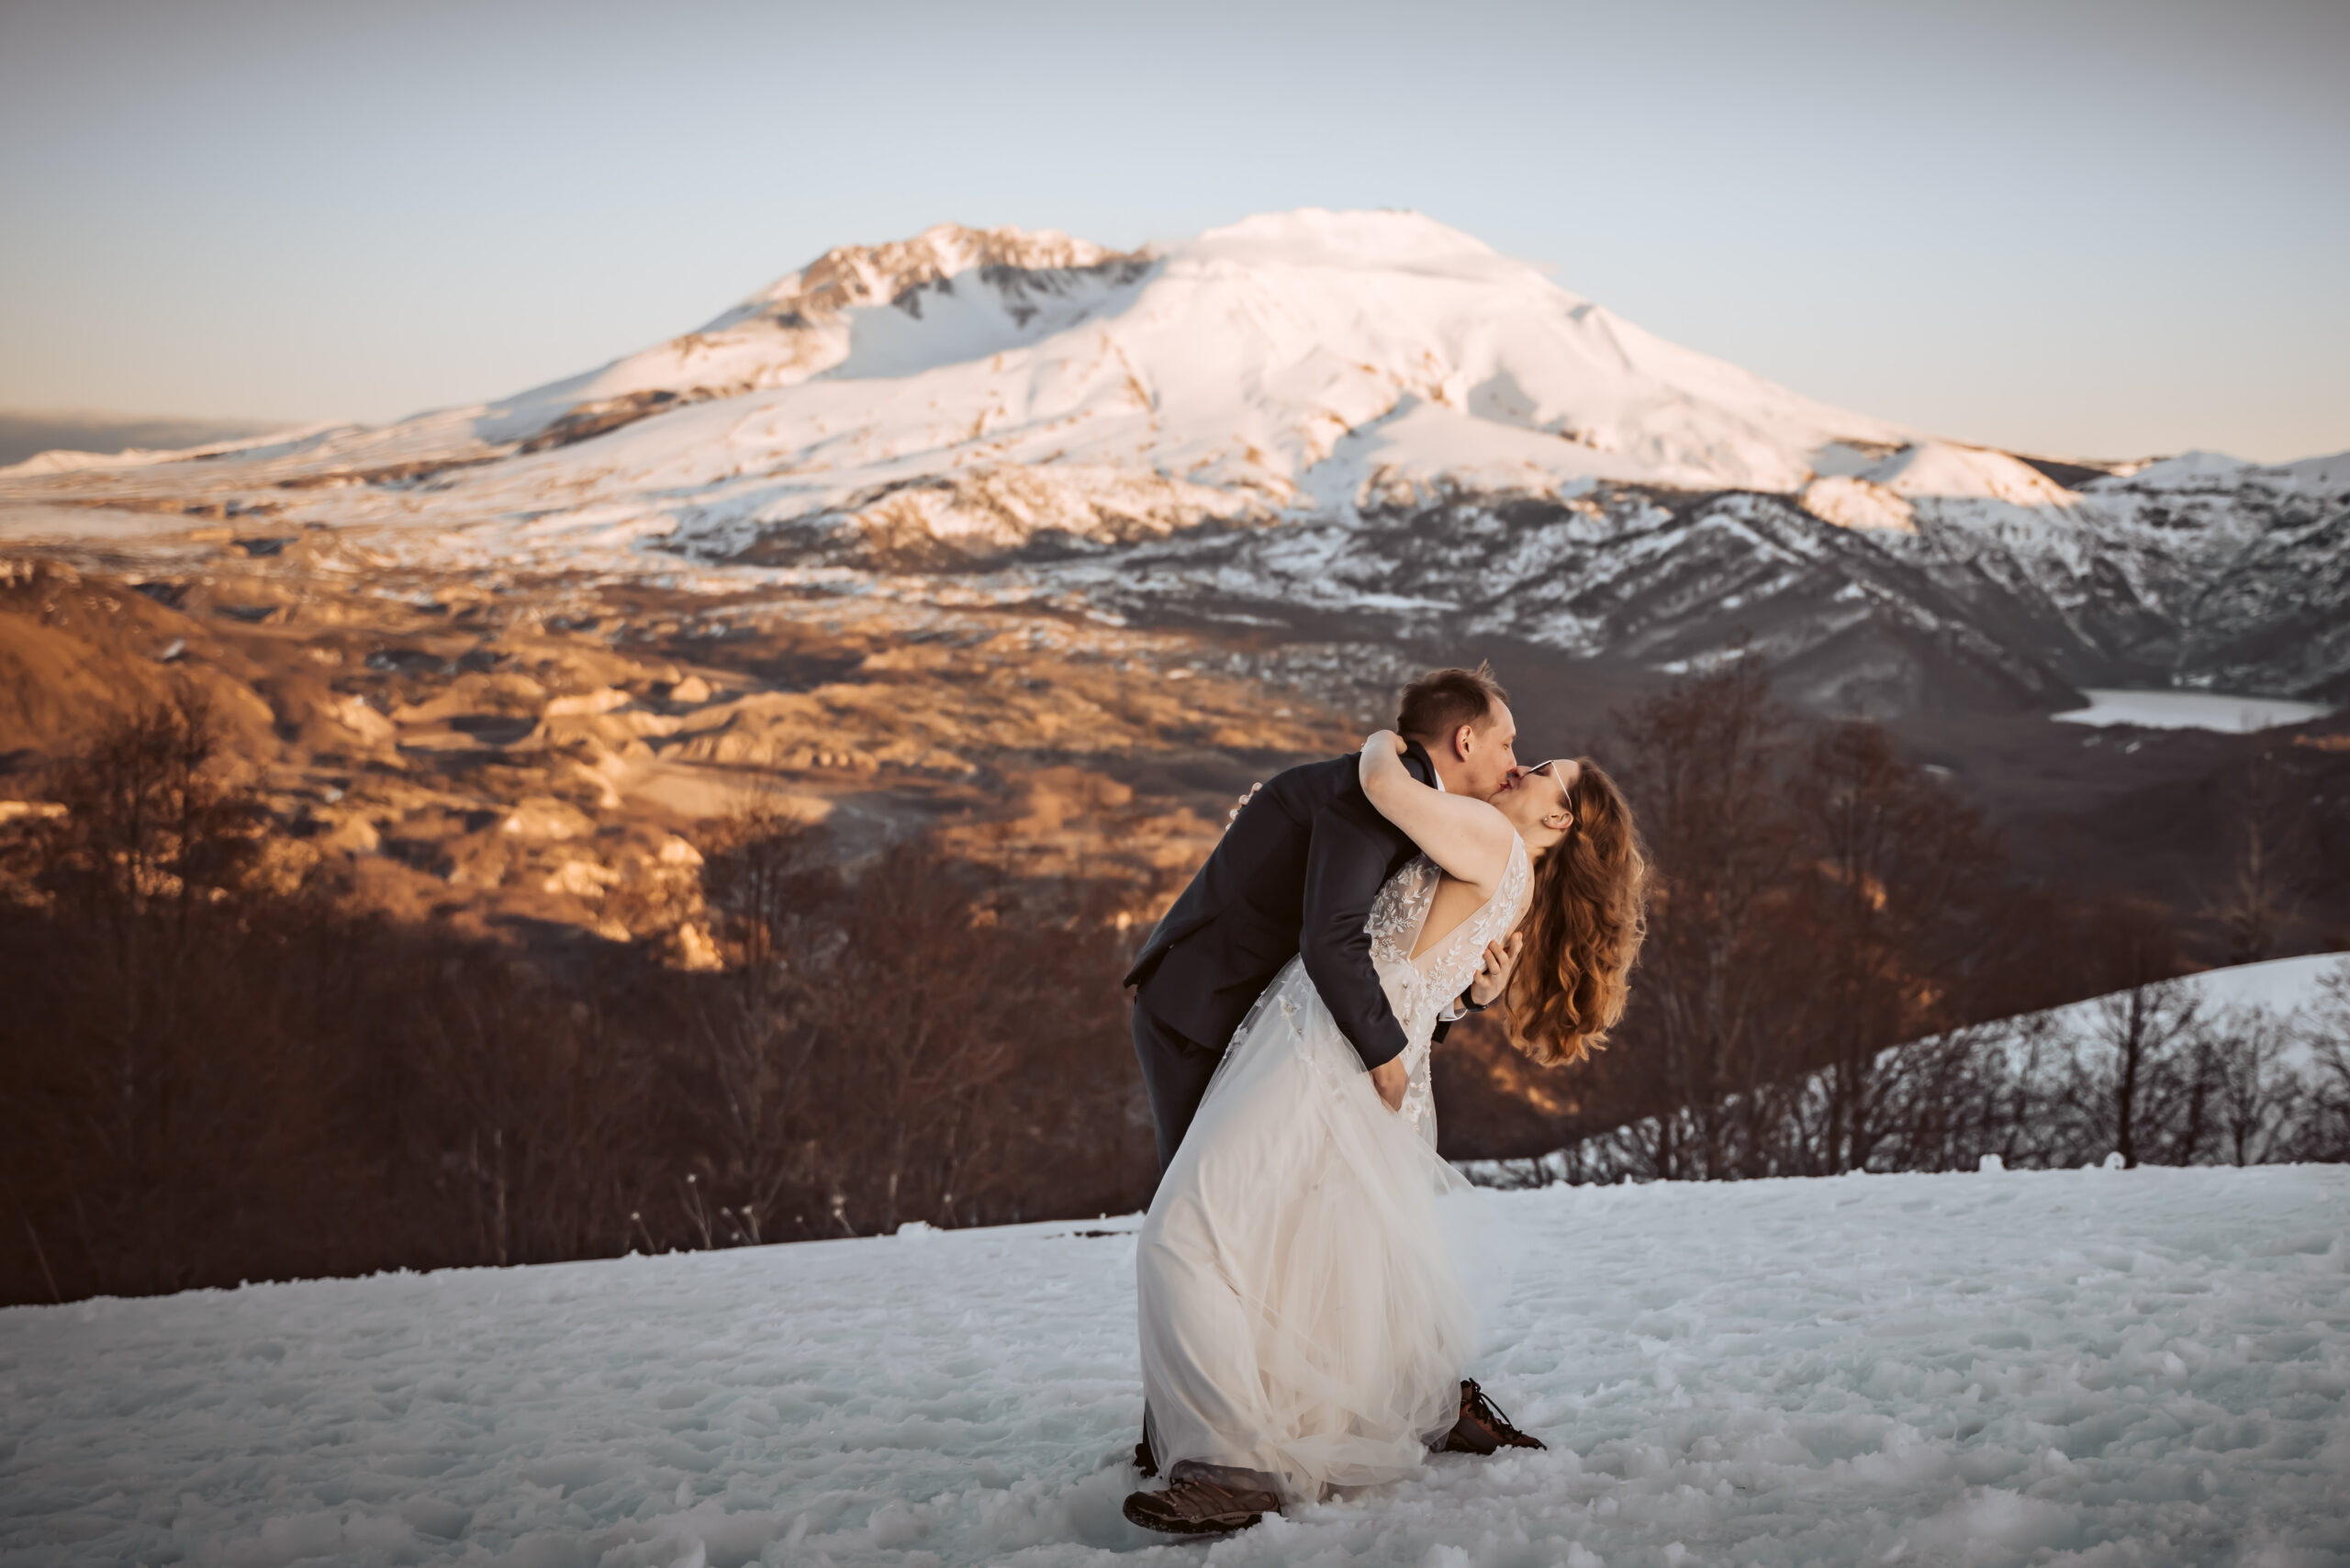 a groom dipping his bride in the snow in front of Mount Saint Helens on their wedding day